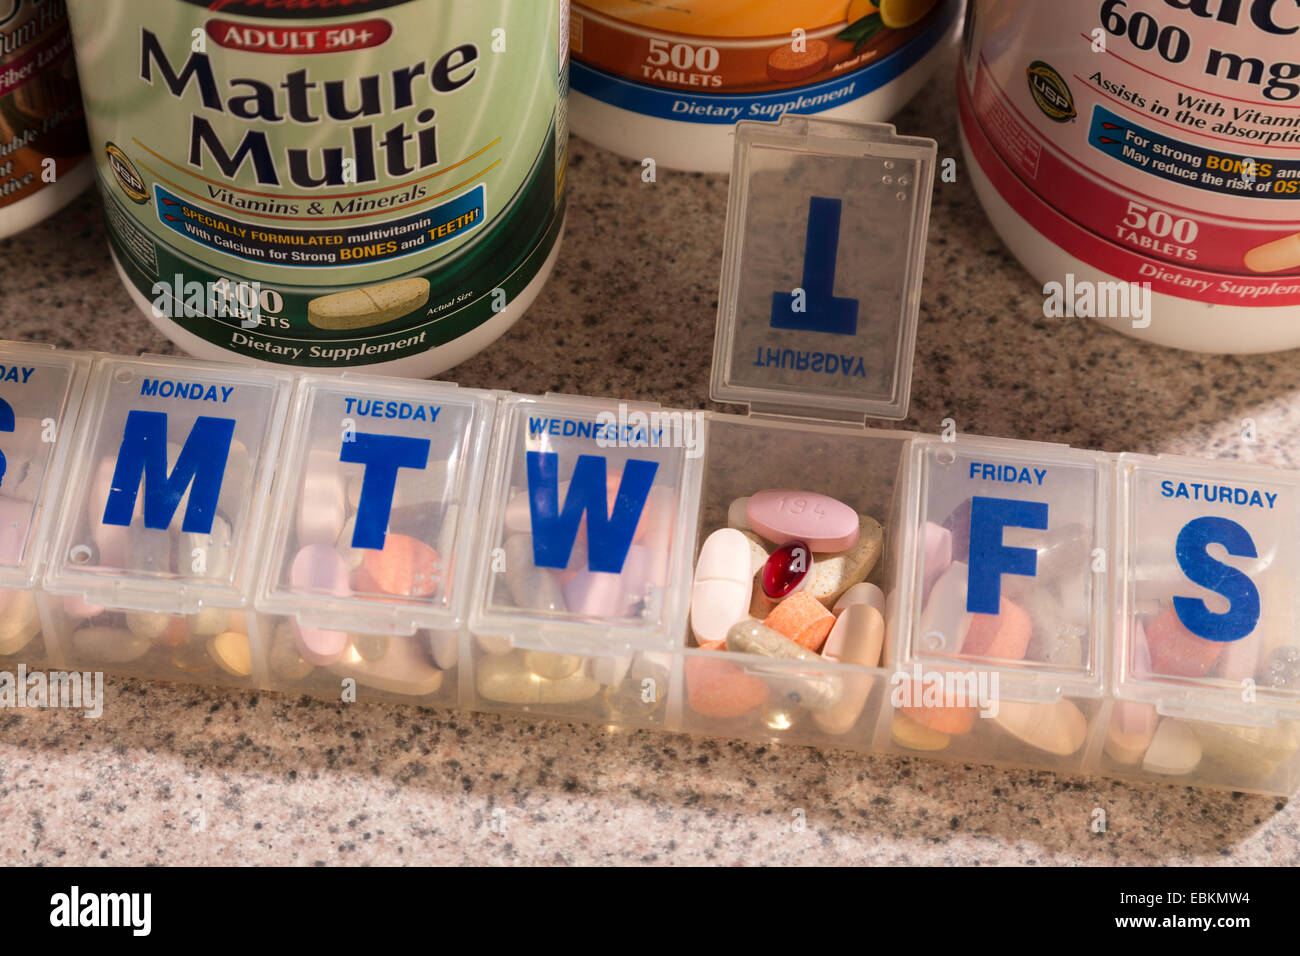 Vitamin Bottles and Pill Container, USA Stock Photo